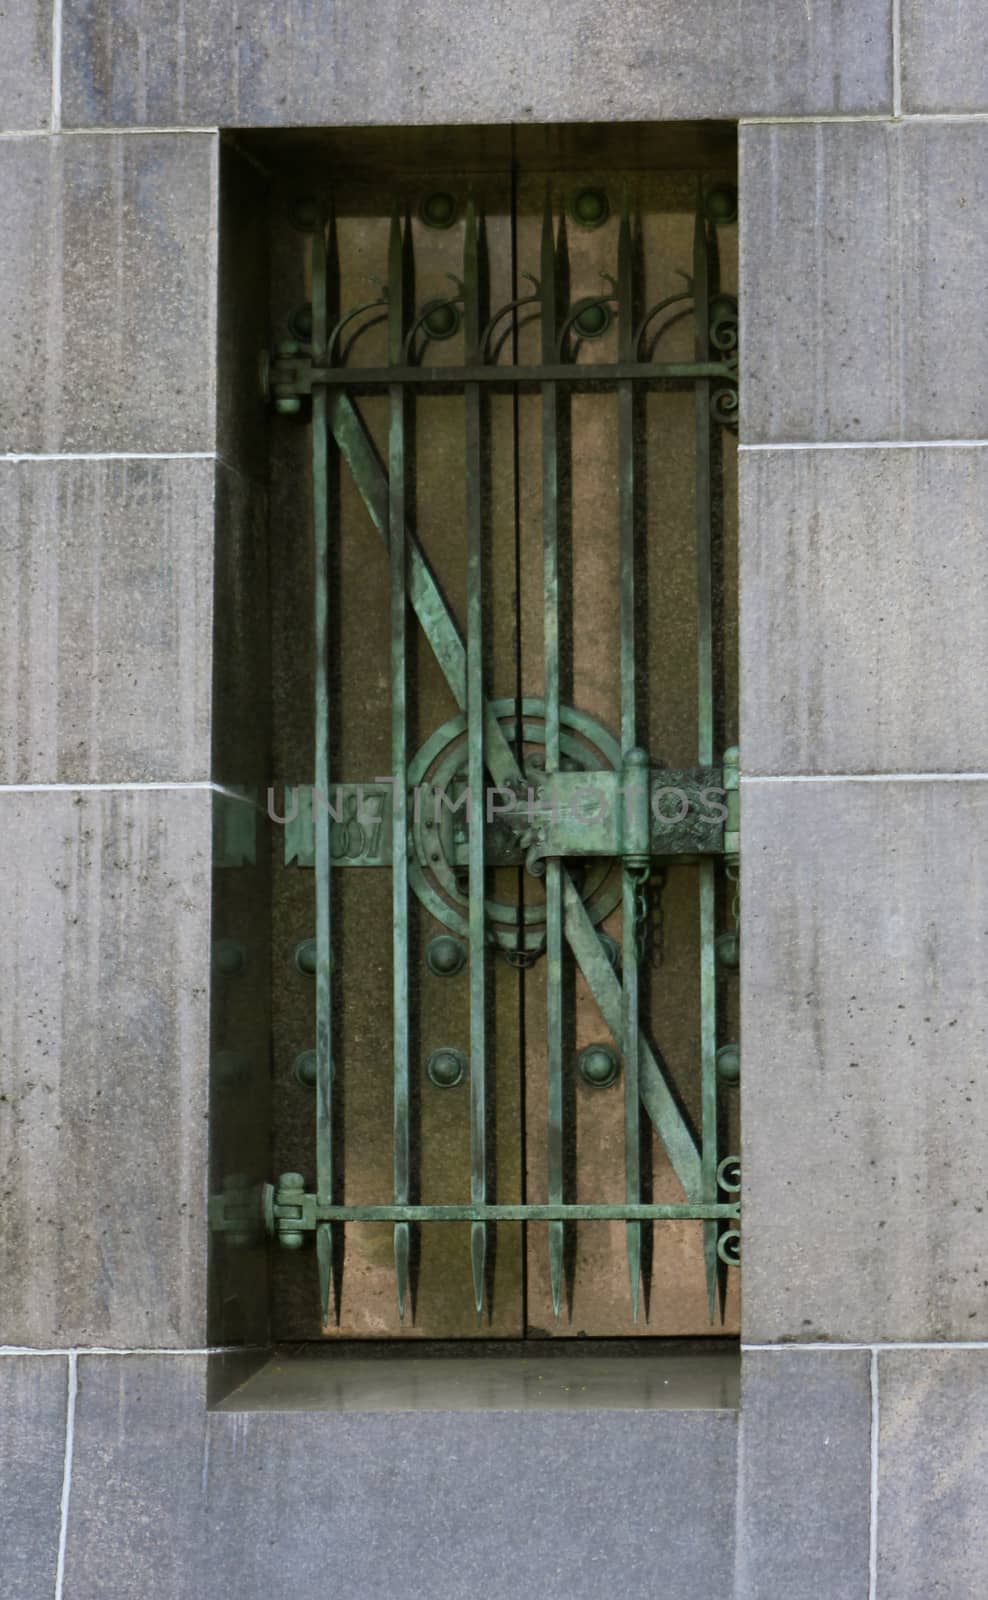 Decorative metal bars aged and weathered to a green patina, on a mausoleum window at Graceland Cemetery, Chicago, Illinois, USA